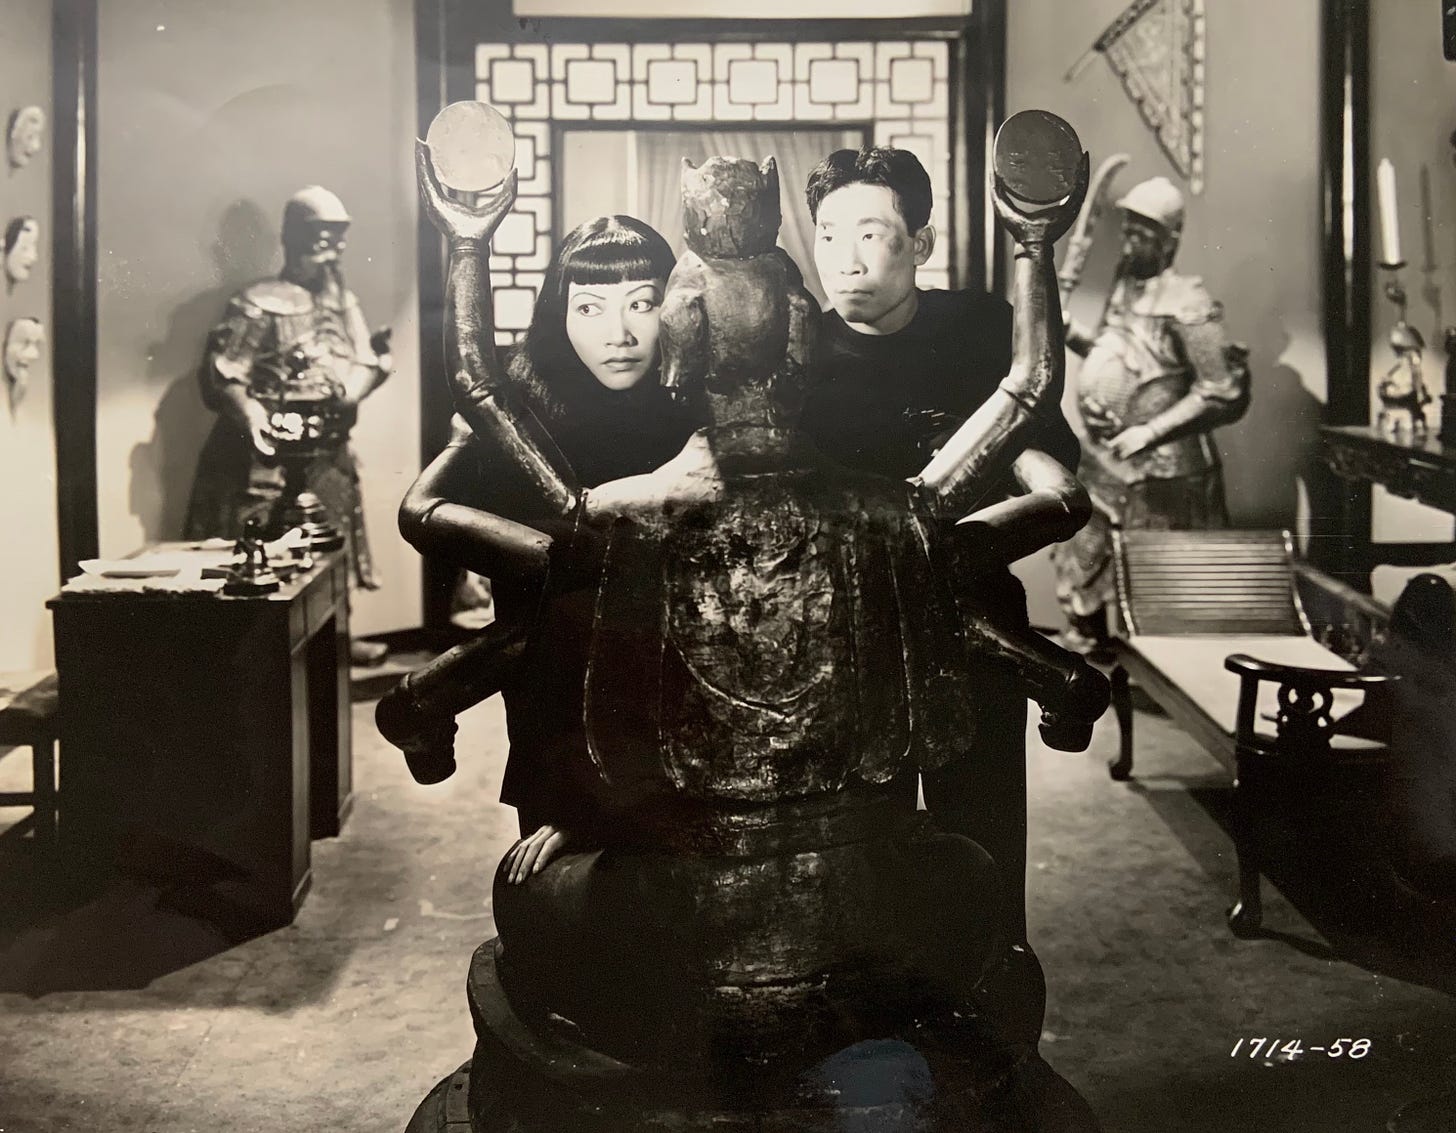 AMW and Philip Ahn hide behind a buddhist statue in a scene from Daughter of Shanghai (1937)